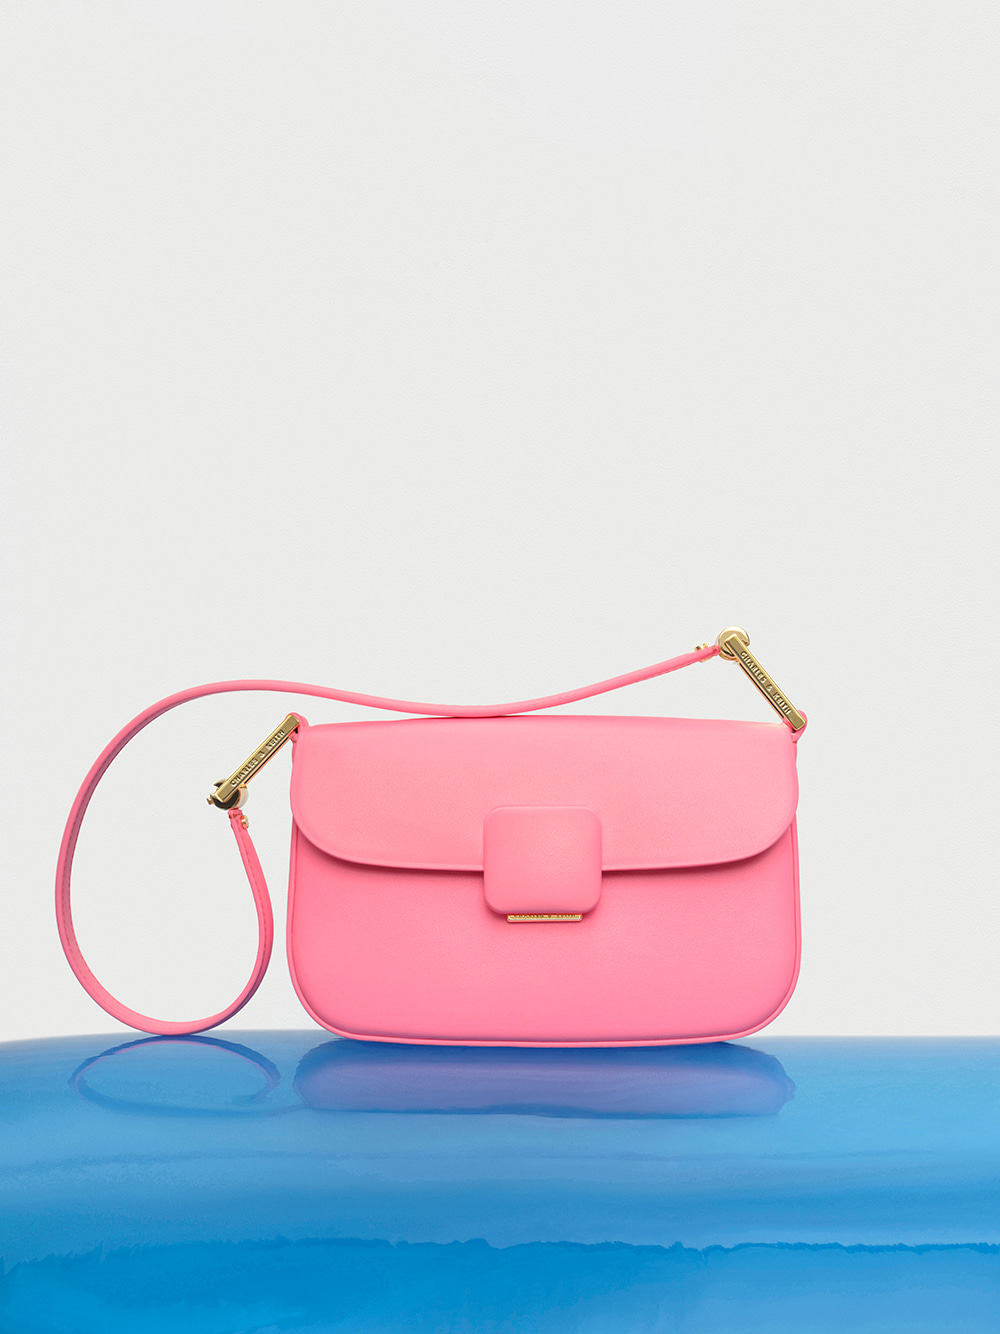 Women's Bags at Charles & Keith